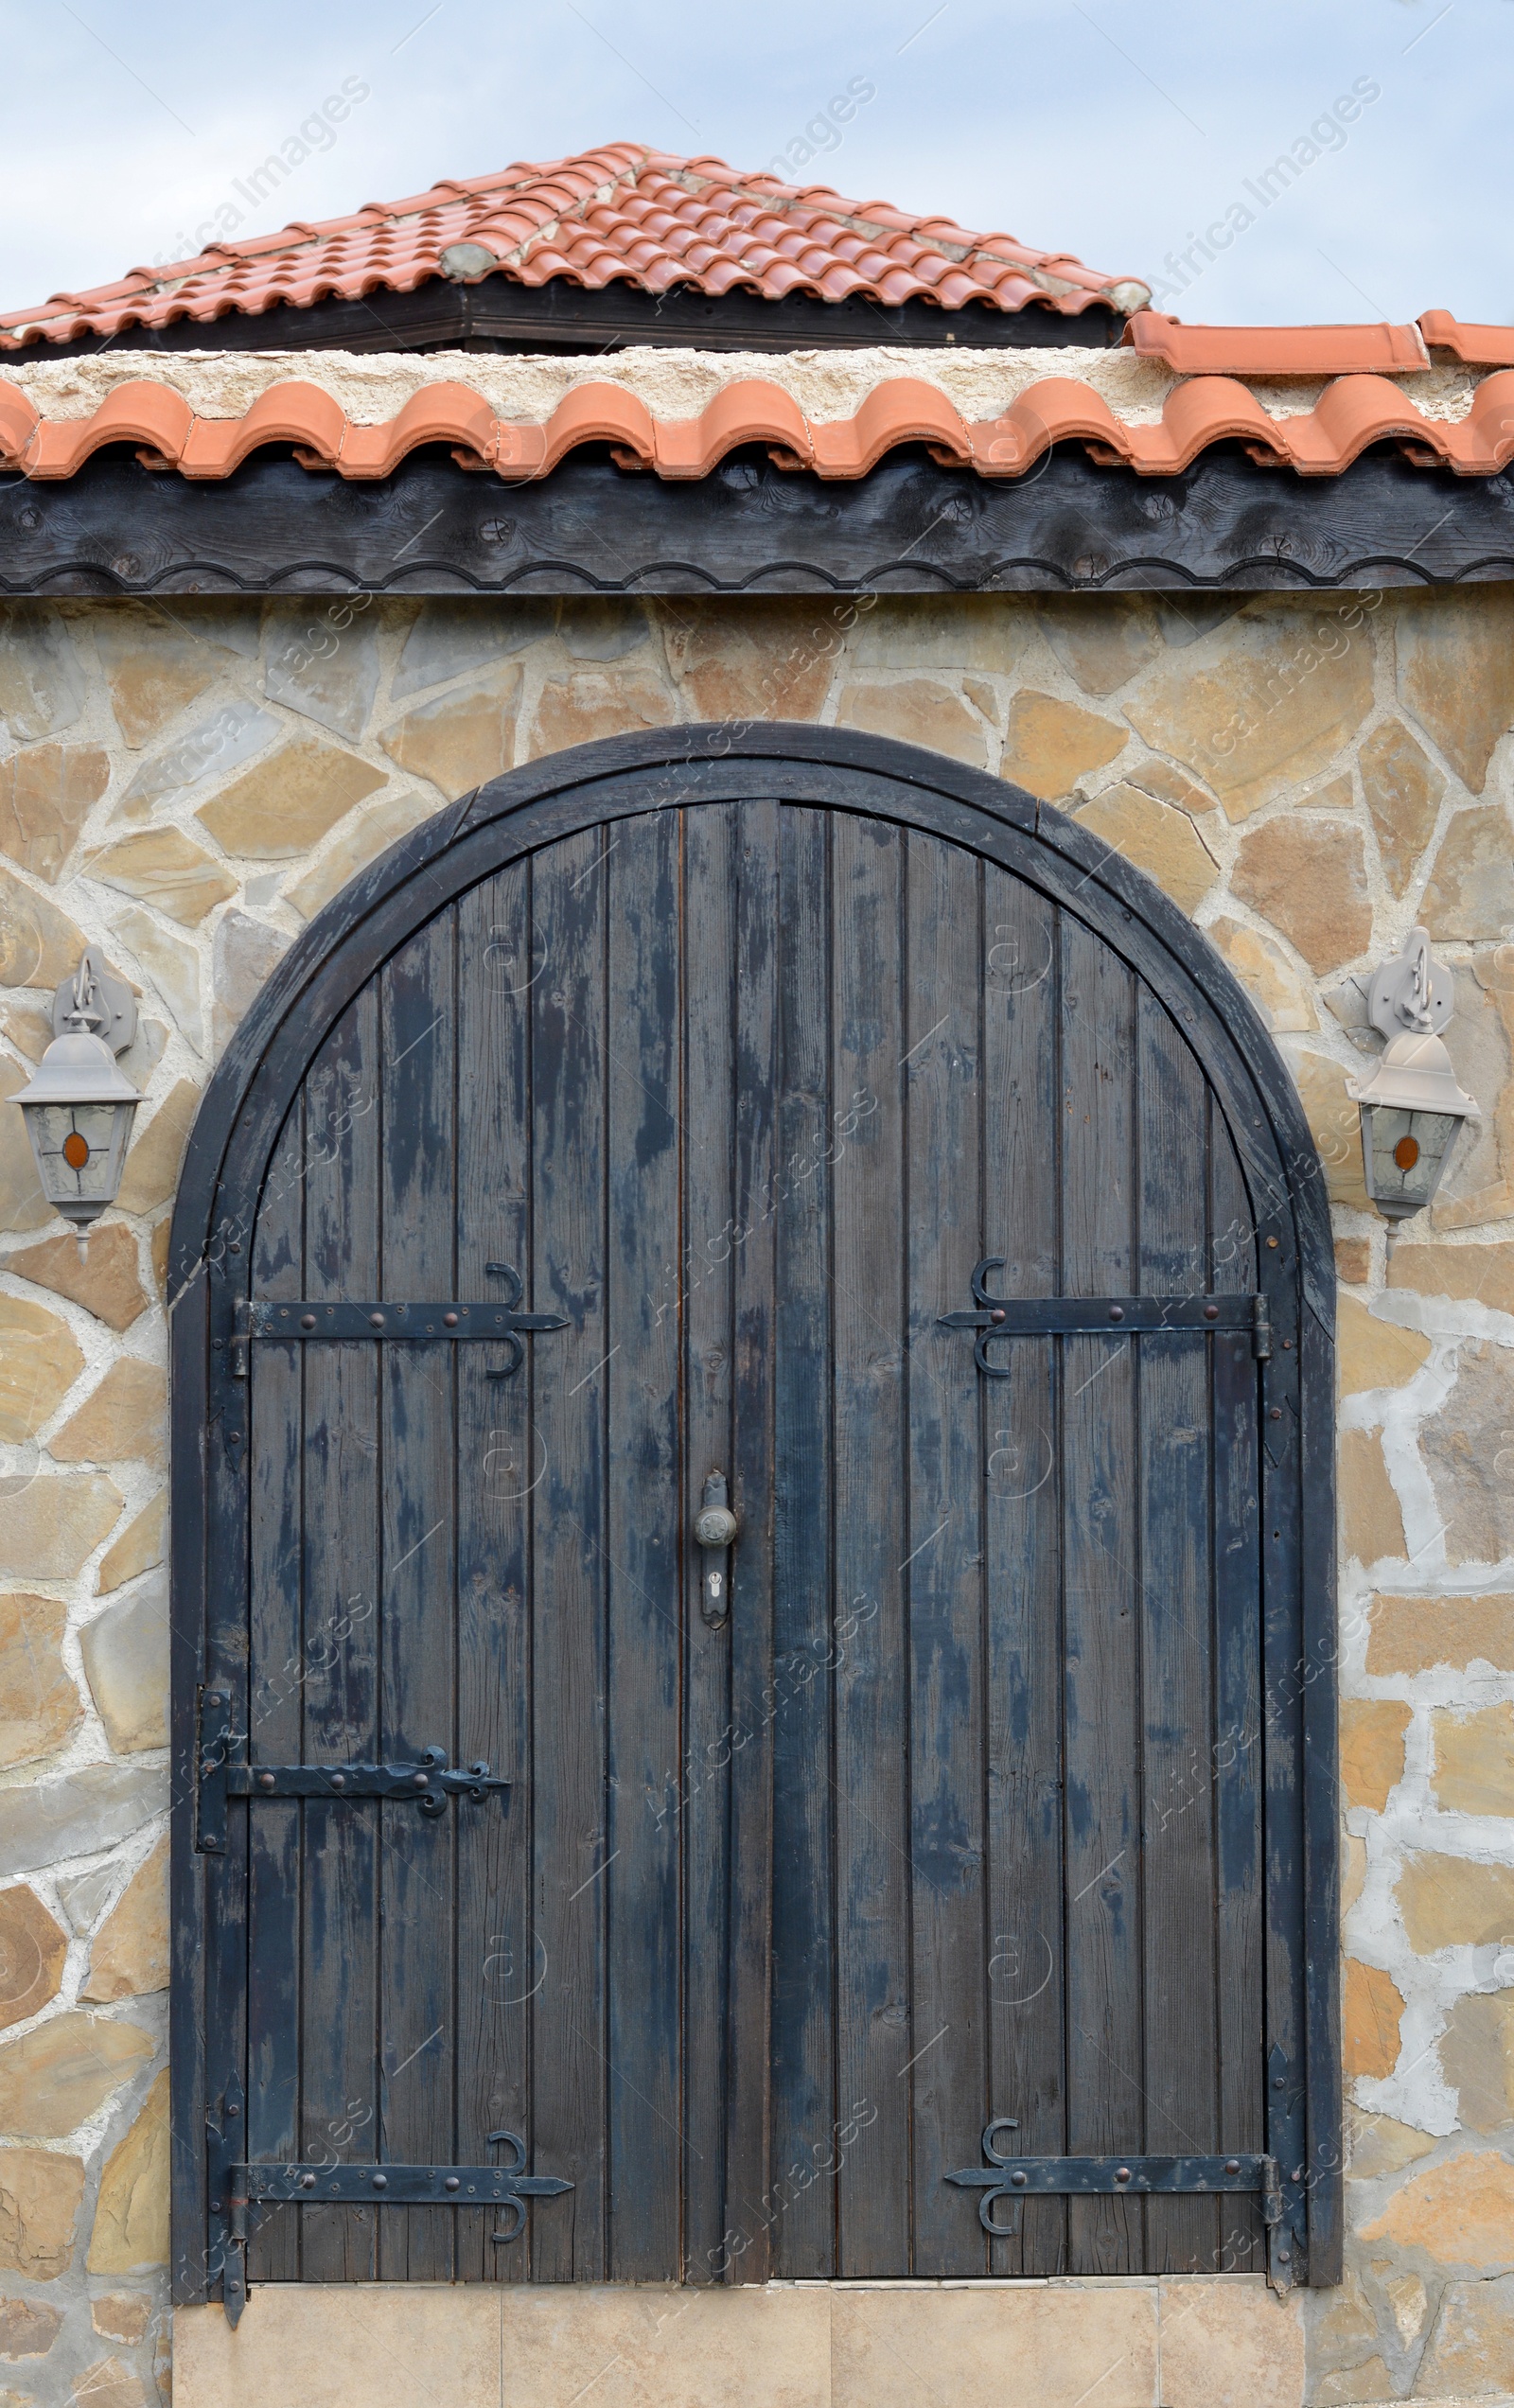 Photo of Entrance of building with beautiful arched wooden door in stone wall outdoors